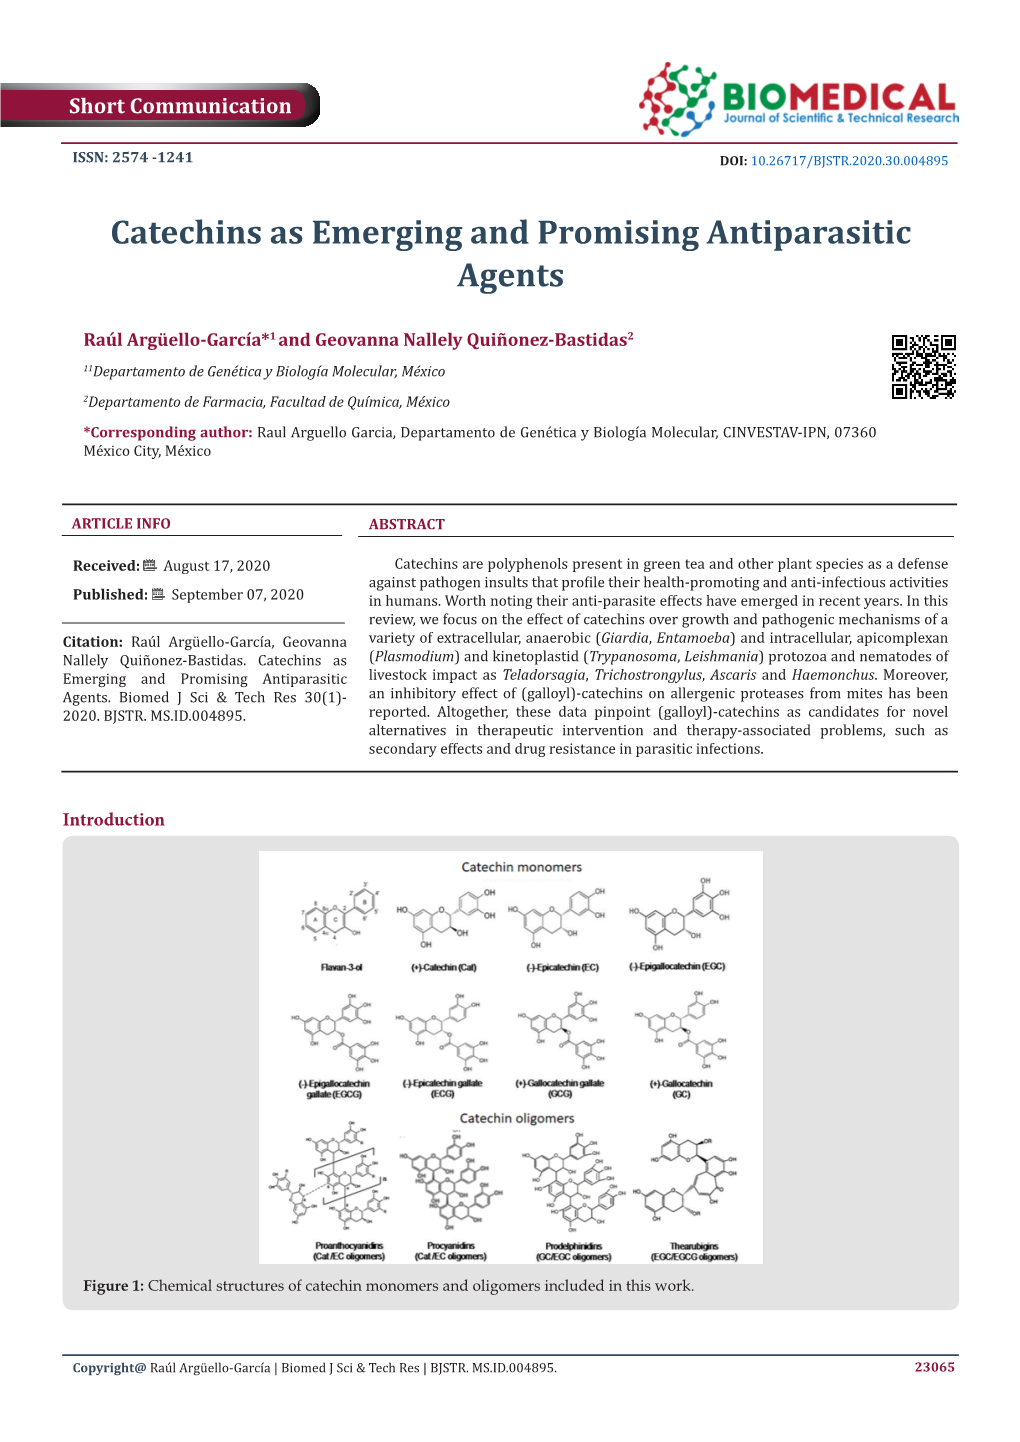 Catechins As Emerging and Promising Antiparasitic Agents